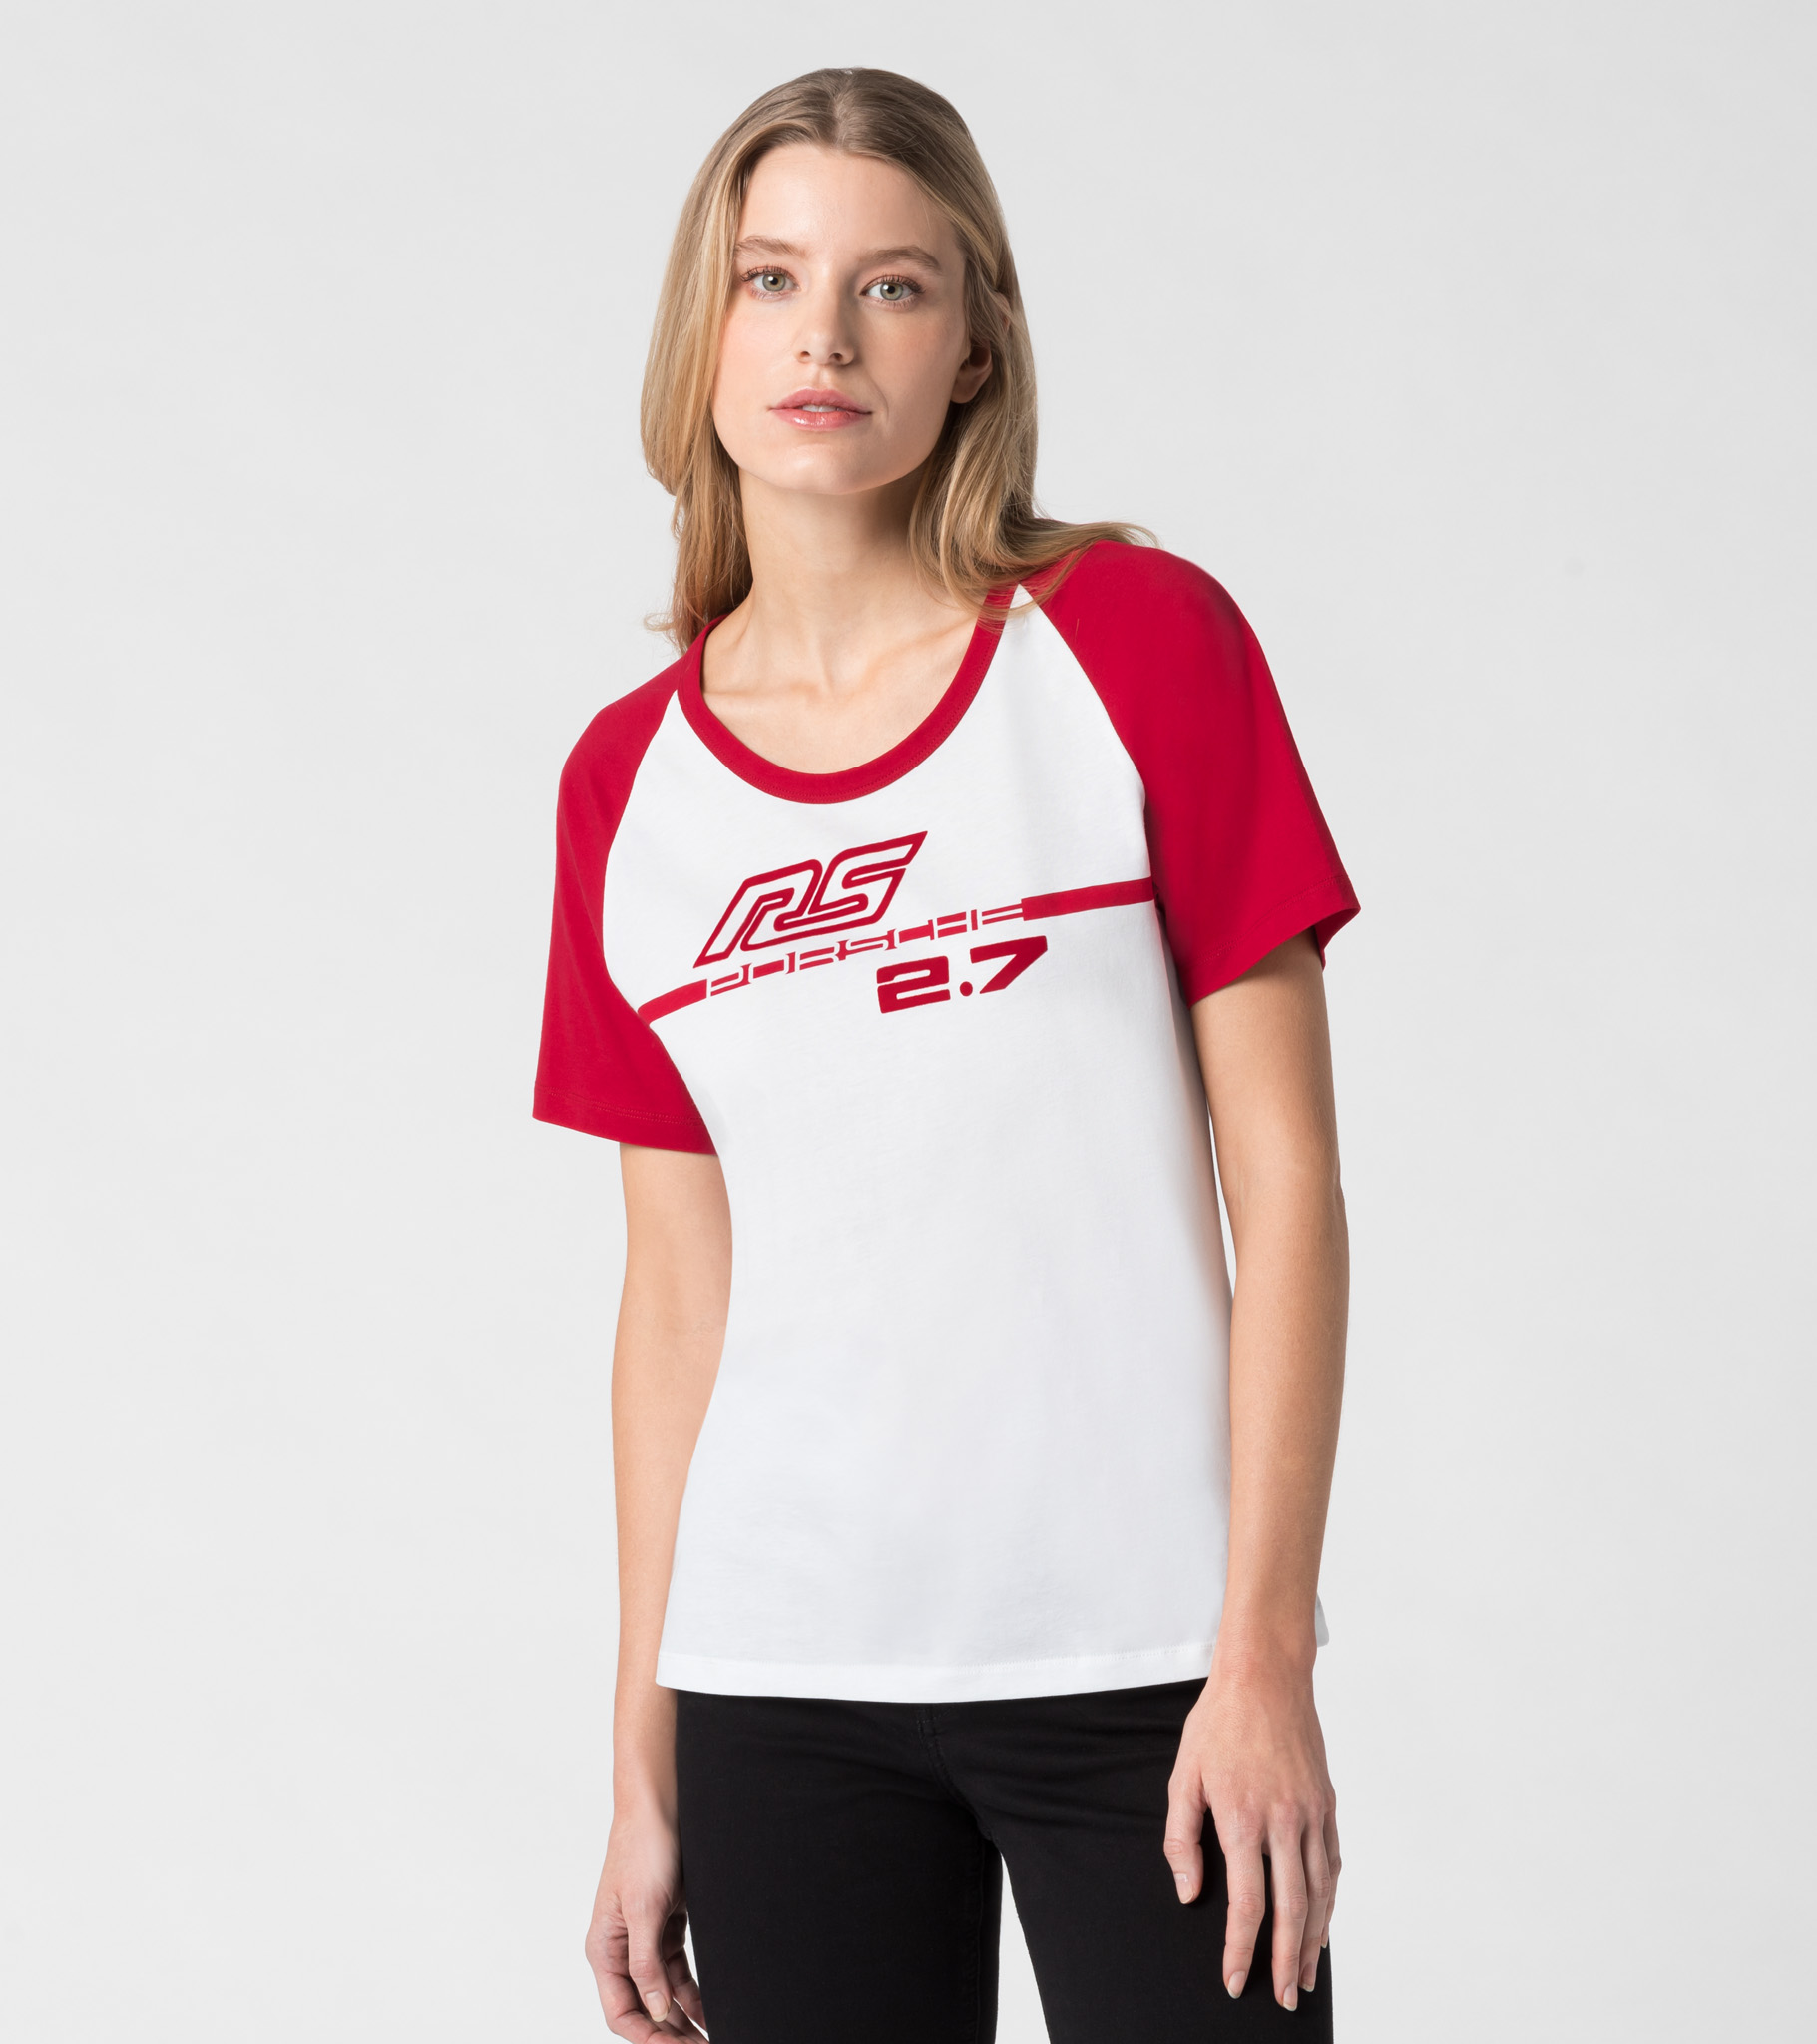 Women's T-Shirt - RS 2.7 Collection zoom